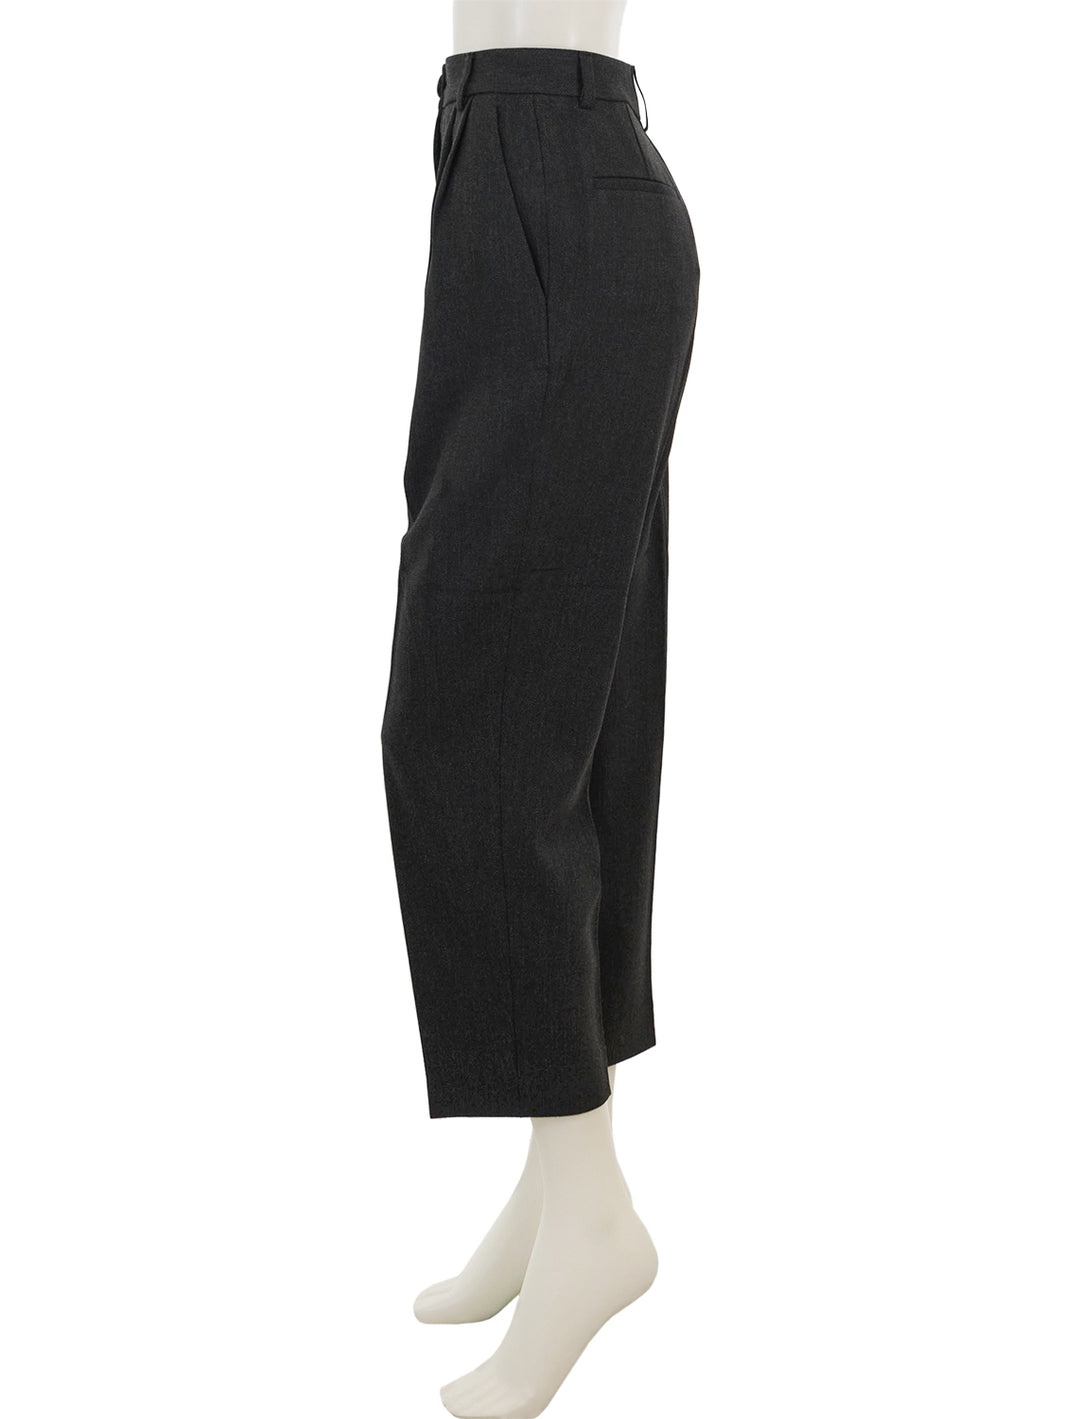 Side view of Sessùn's Timothy Pant in Carobella.